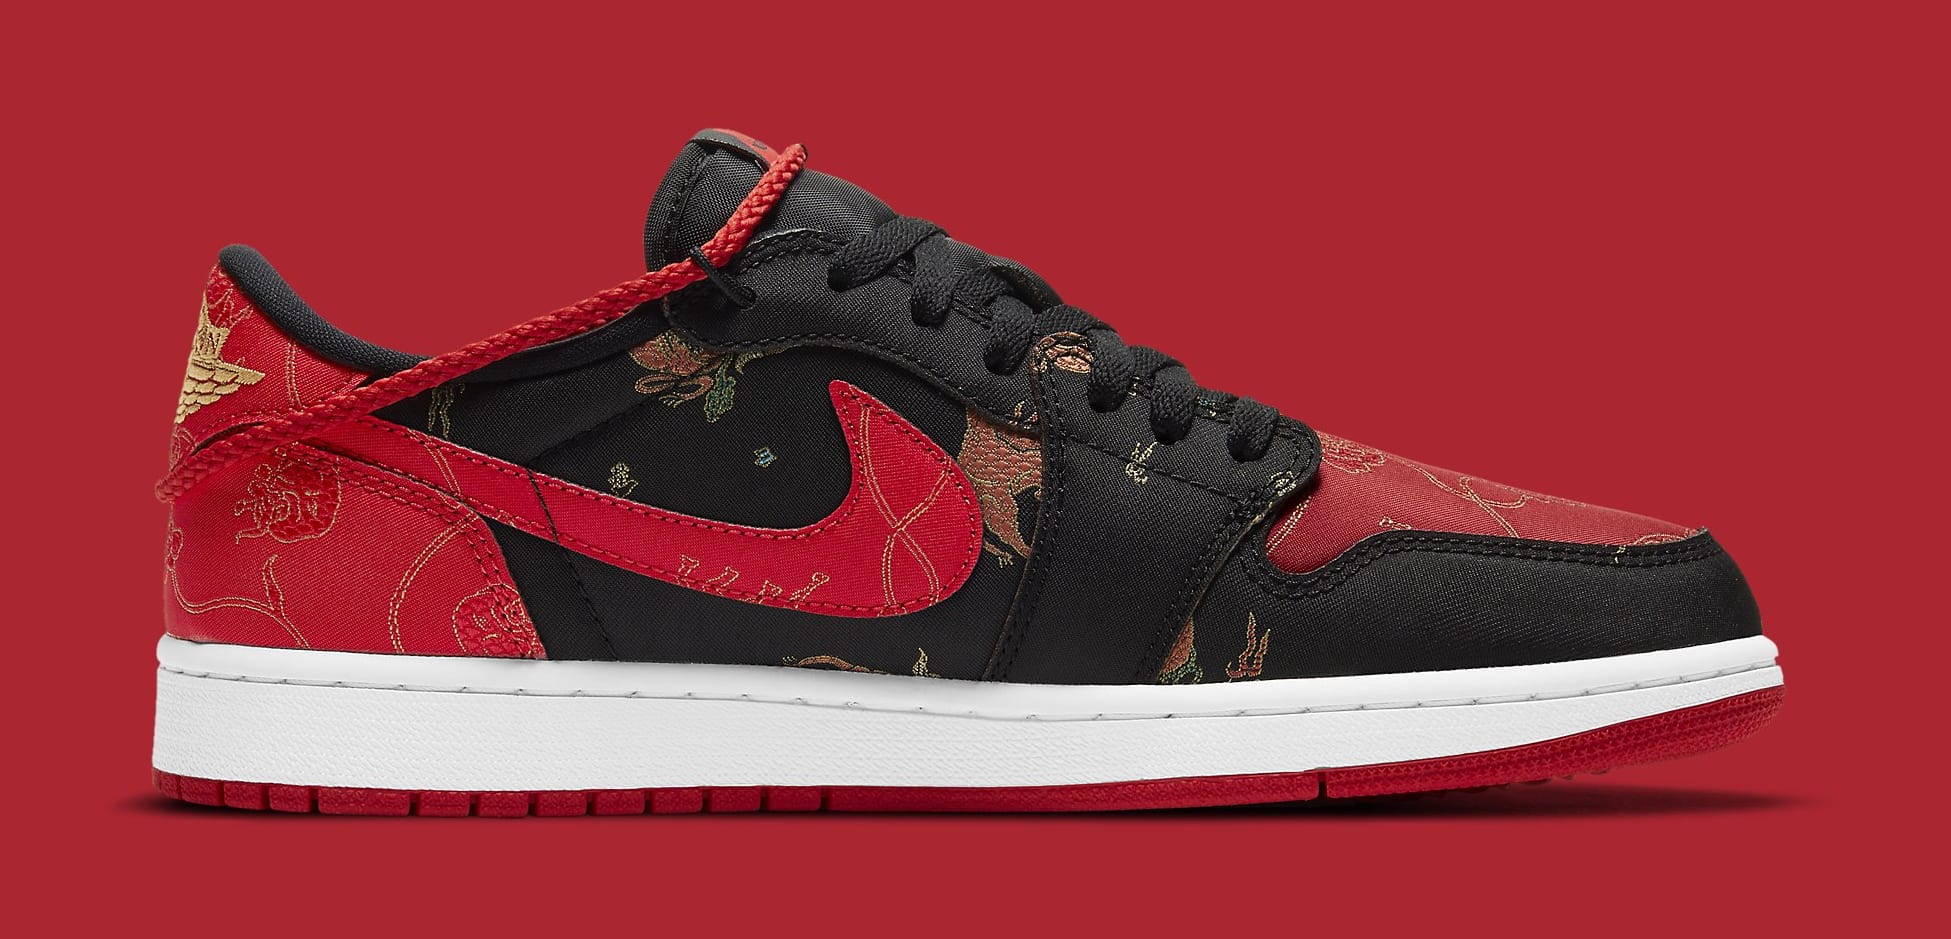 Only 8,500 Pairs of the 'Chinese New Year' Air Jordan 1 Lows Are